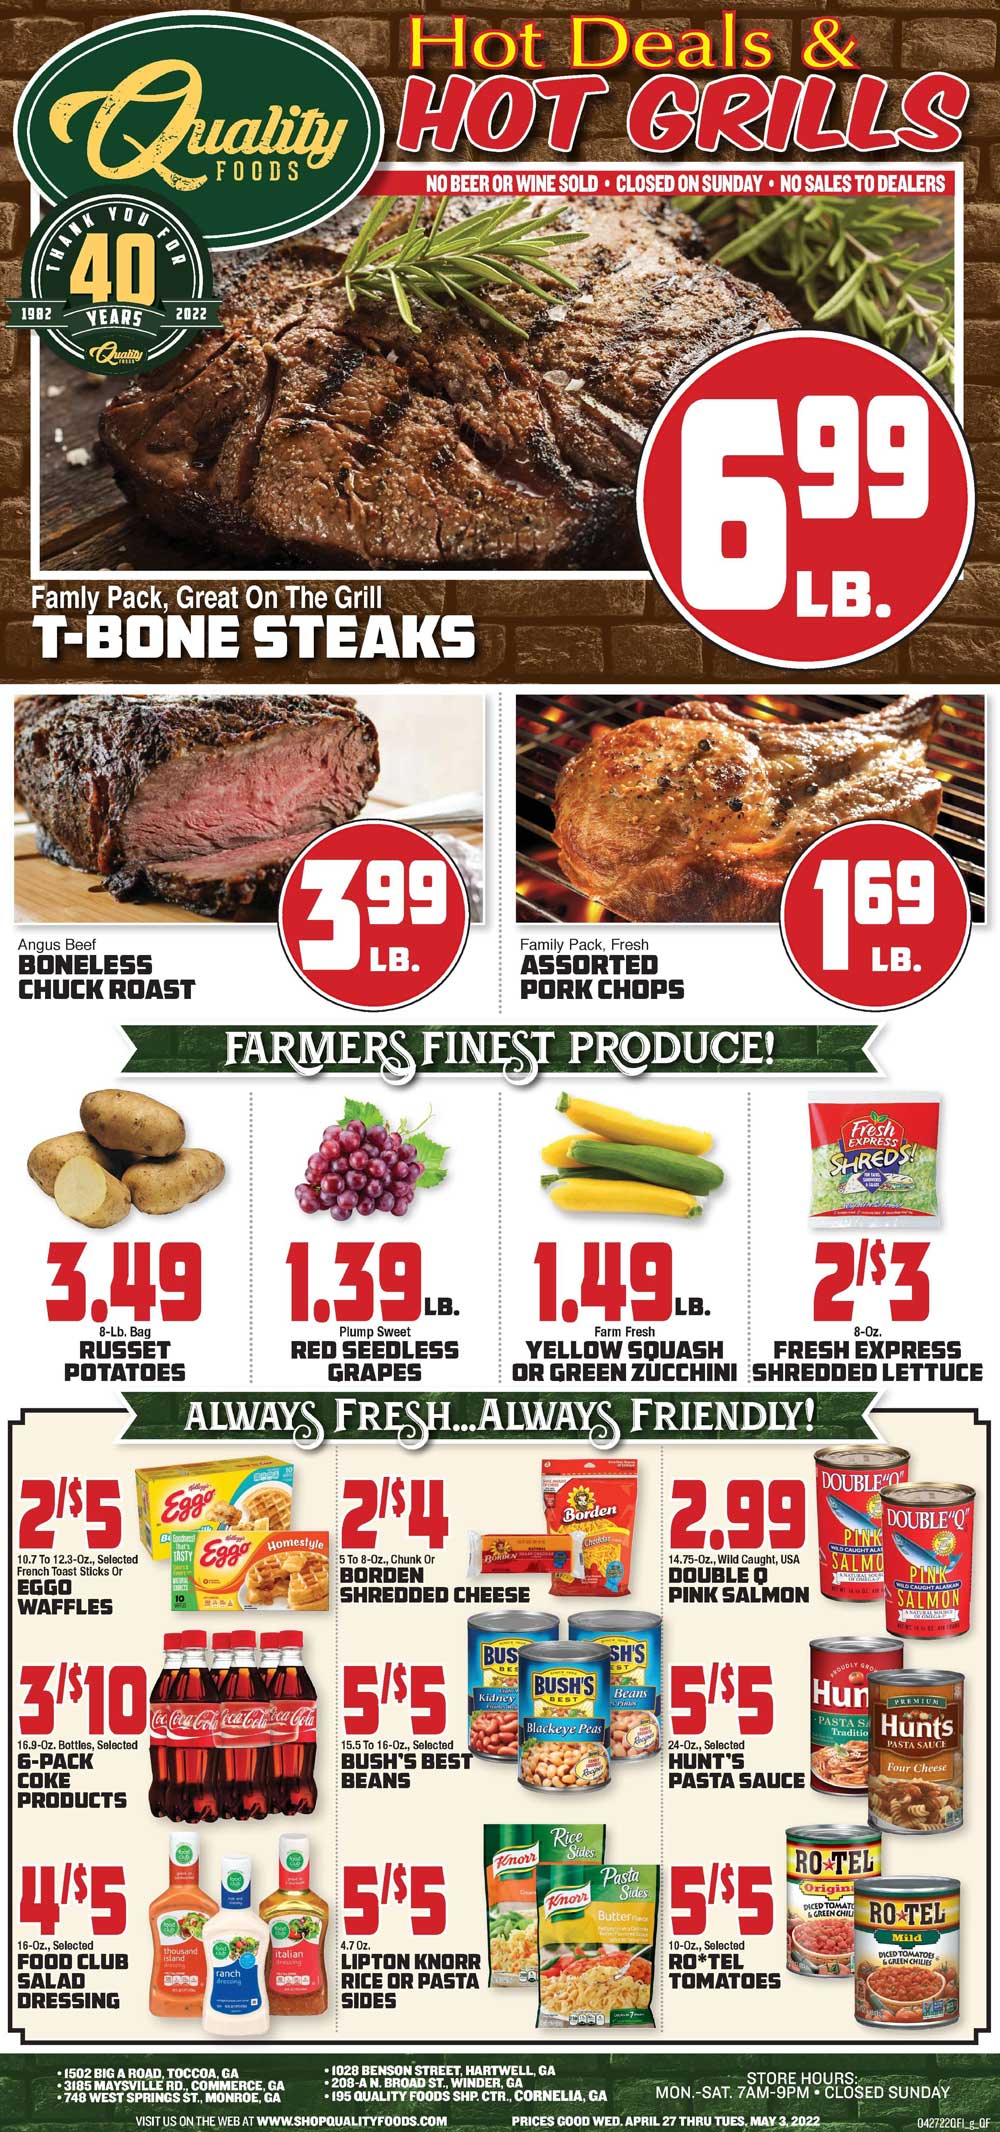 Quality Foods Weekly Ad (4/27/22 - 5/03/22)